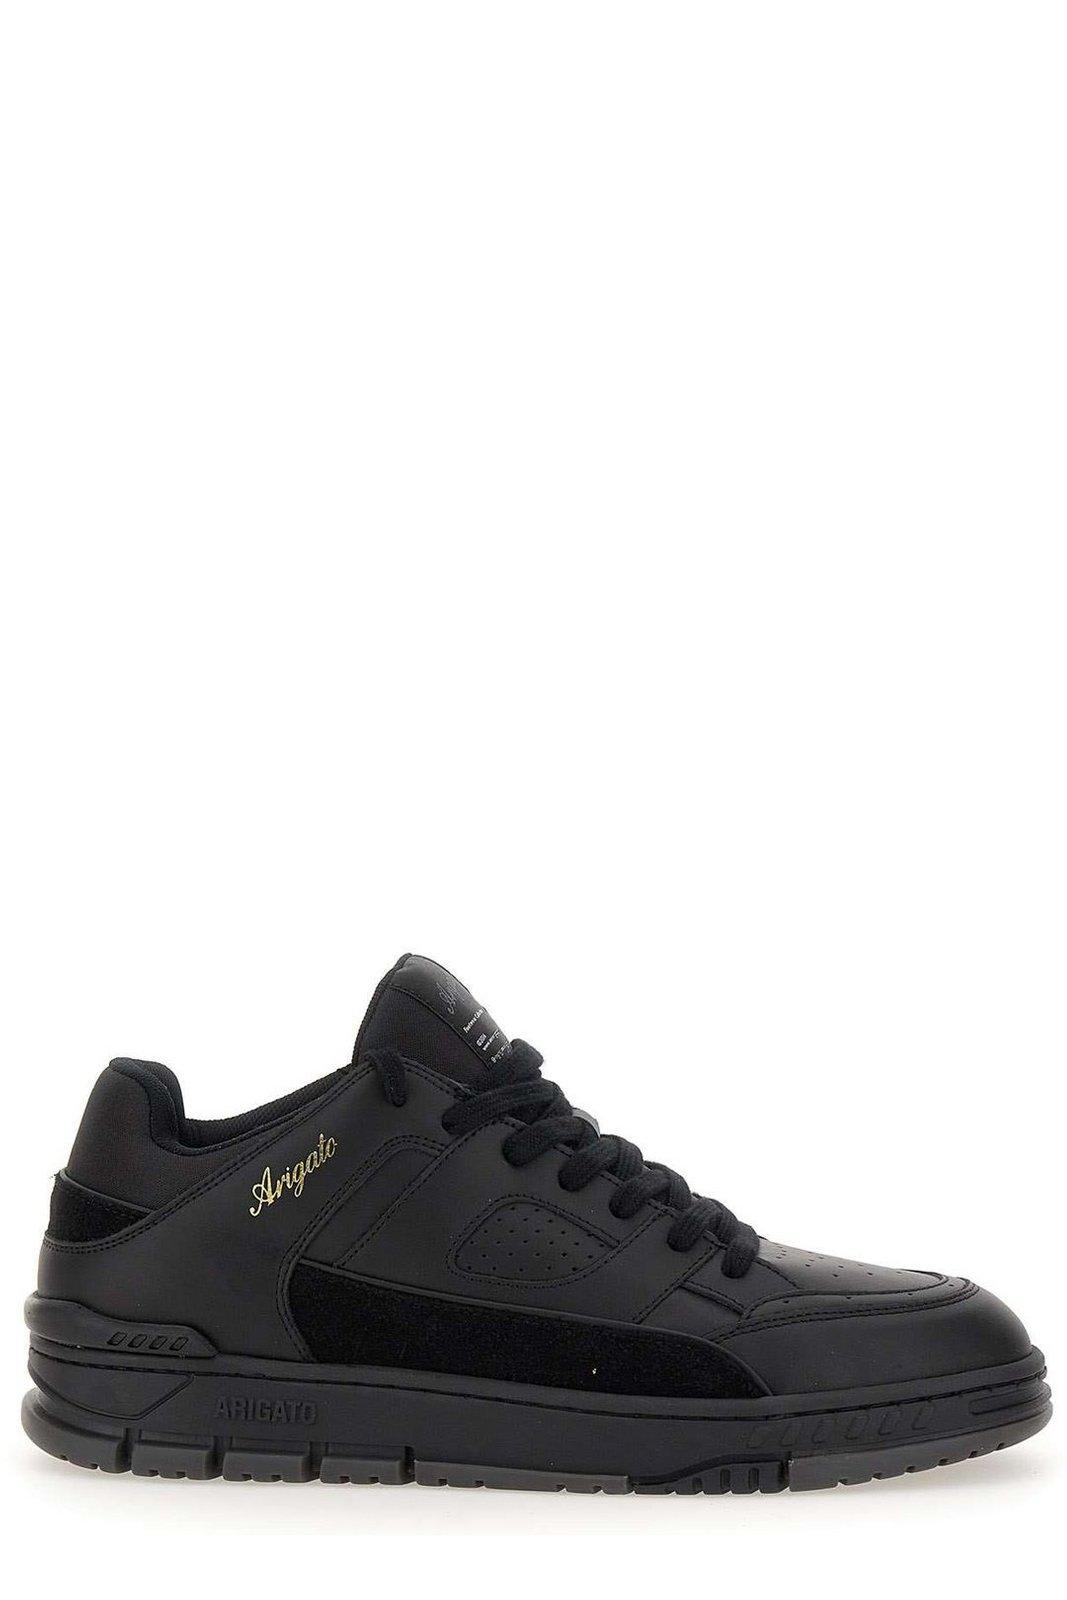 Shop Axel Arigato Round Toe Mid-top Sneakers